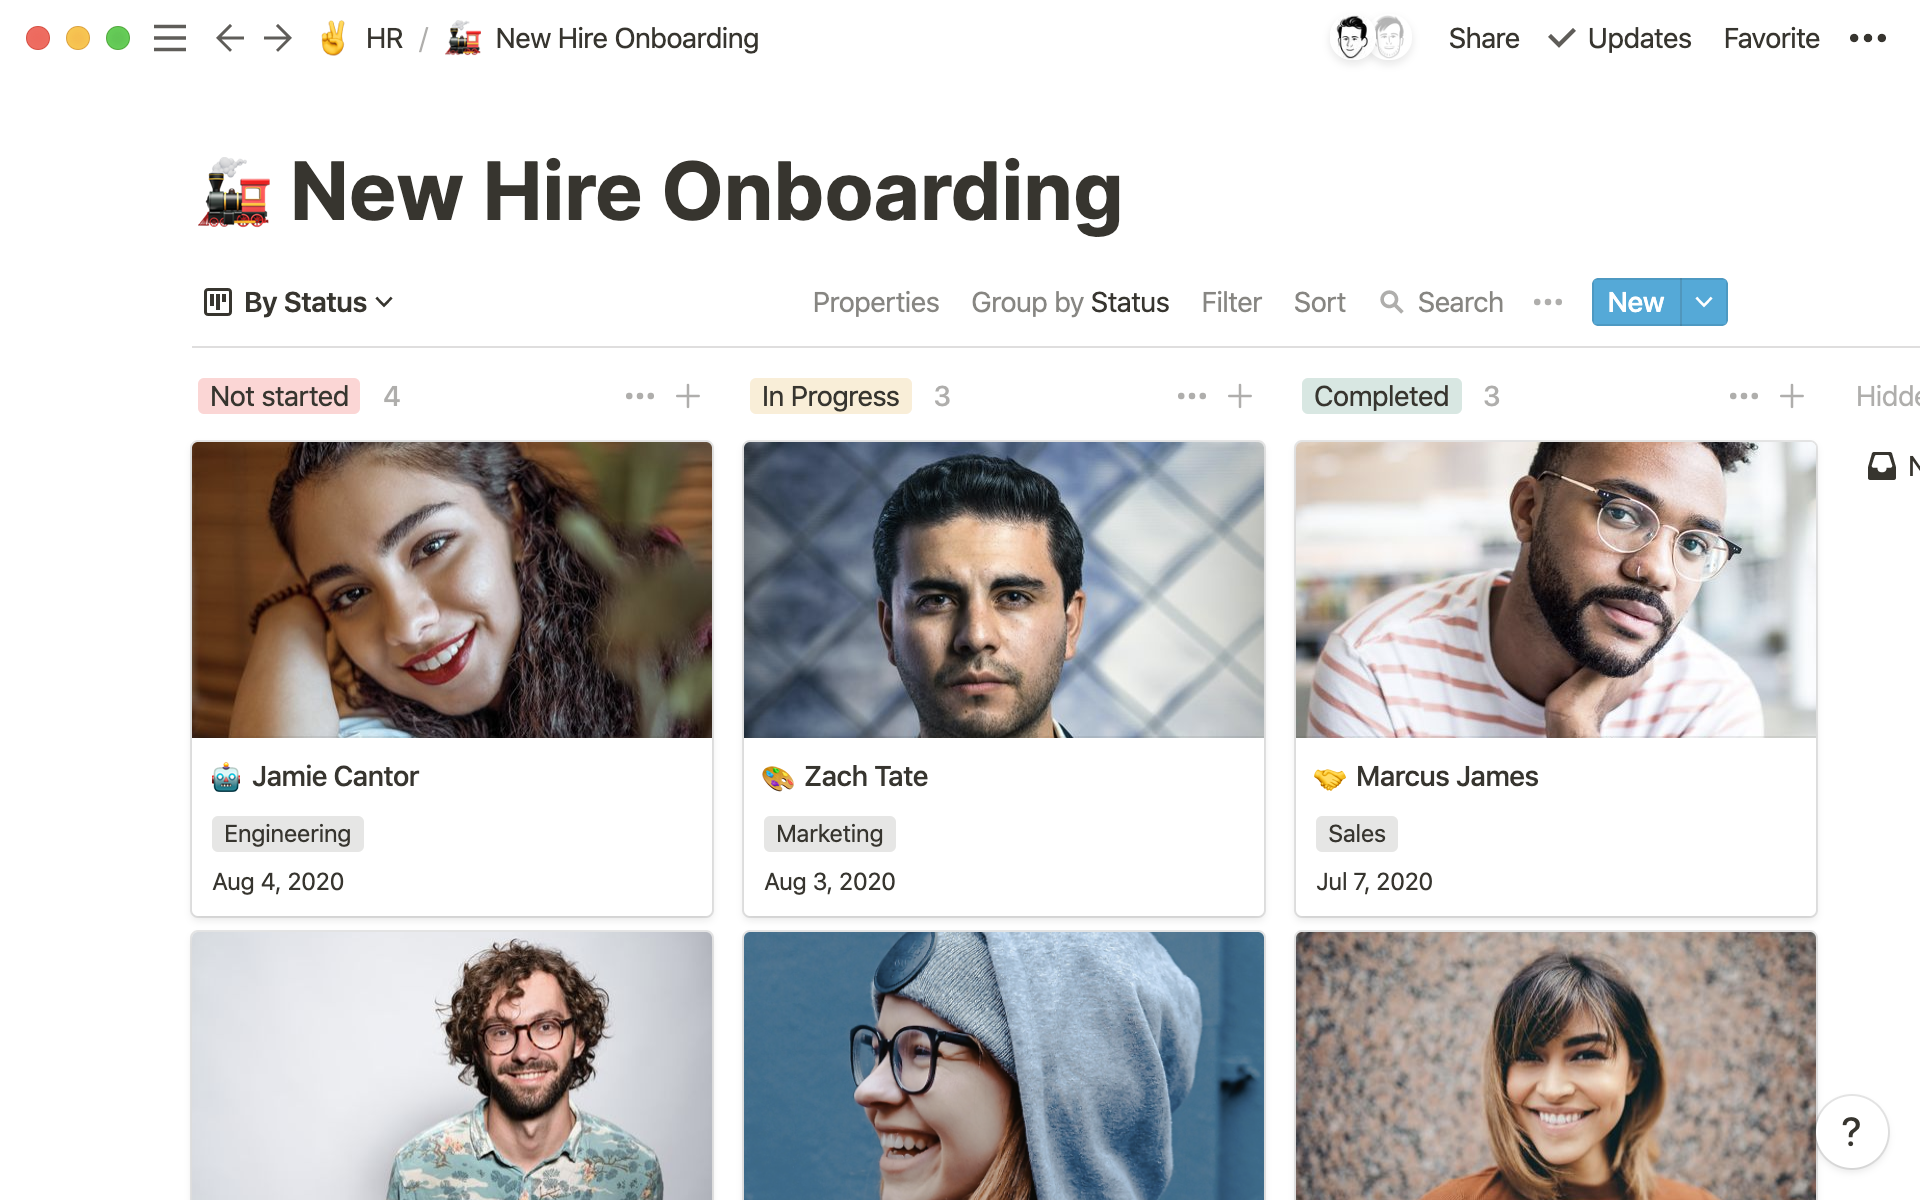 See where every new employee is at in their onboarding process.